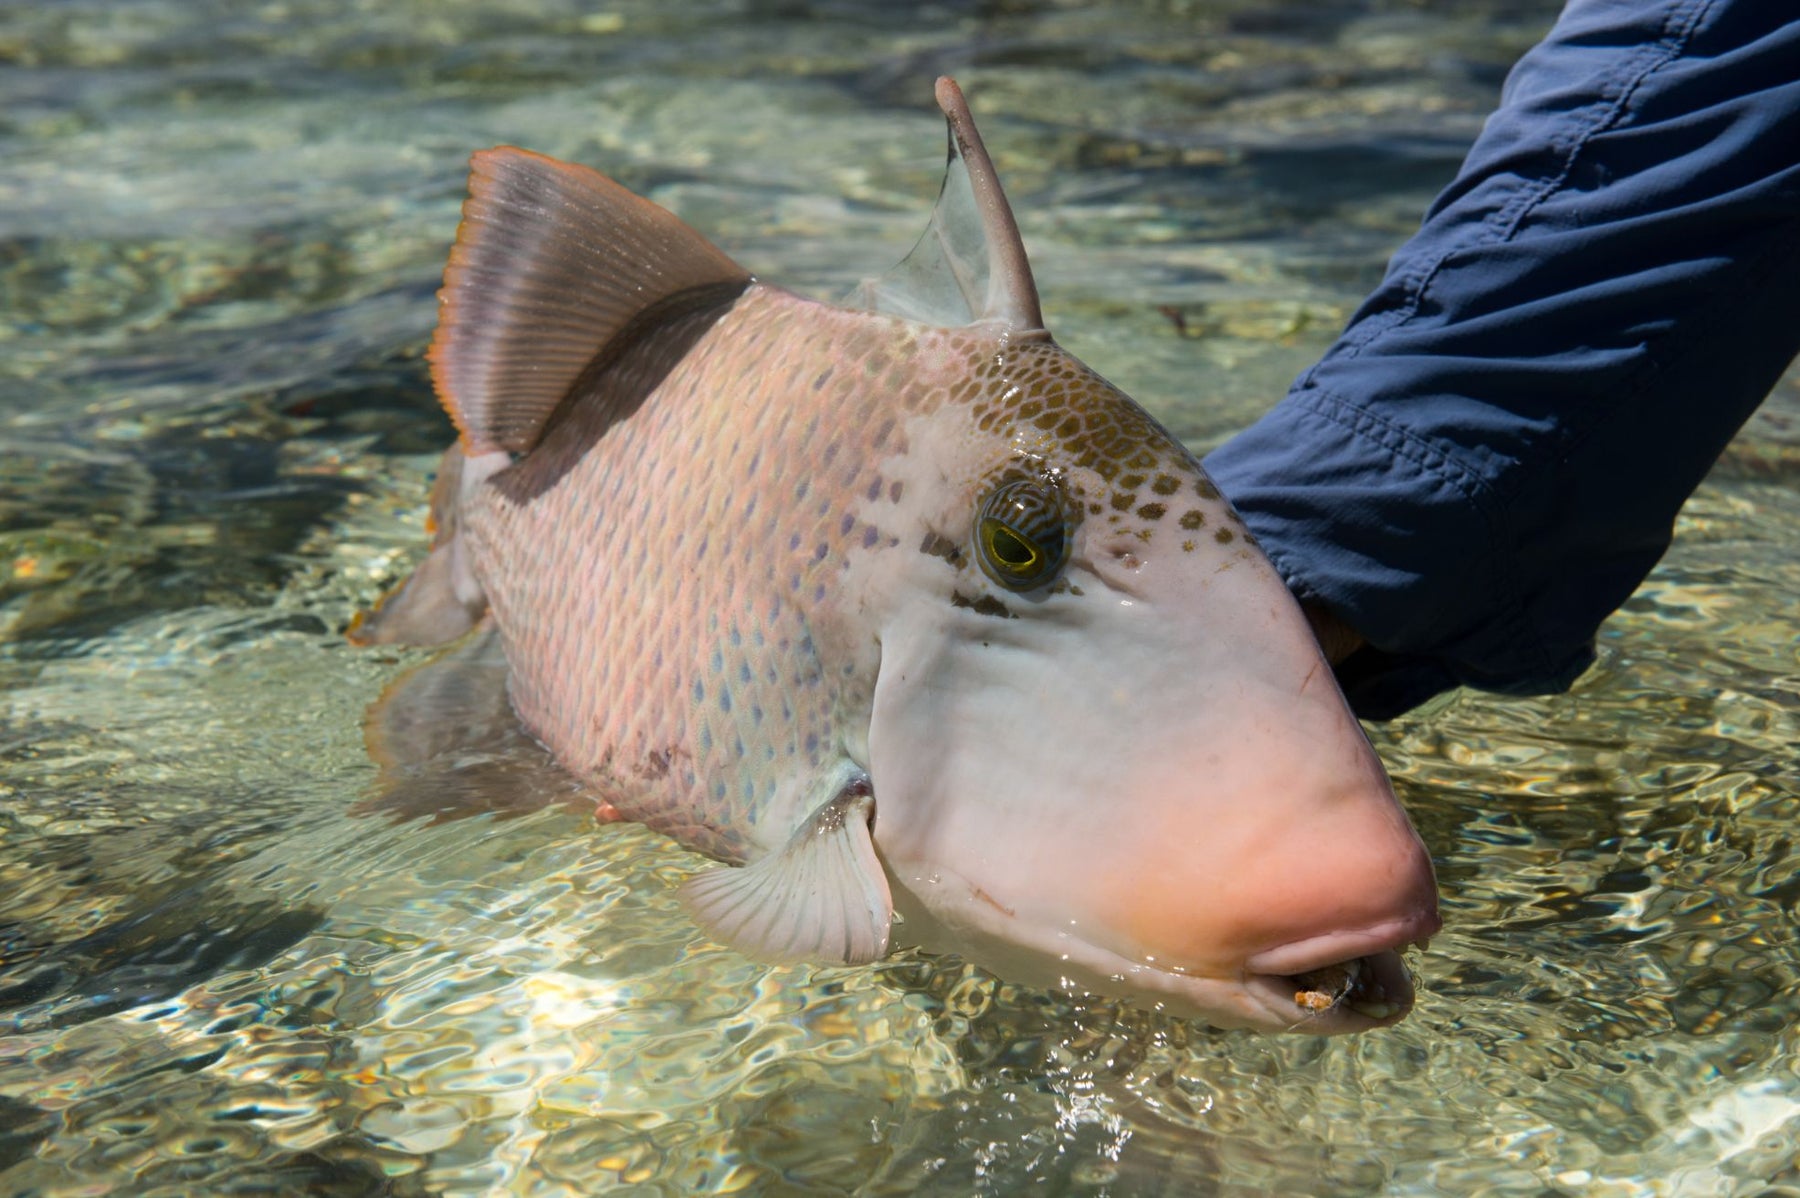 15 Exotic Species to Target on a Seychelles Fishing Trip